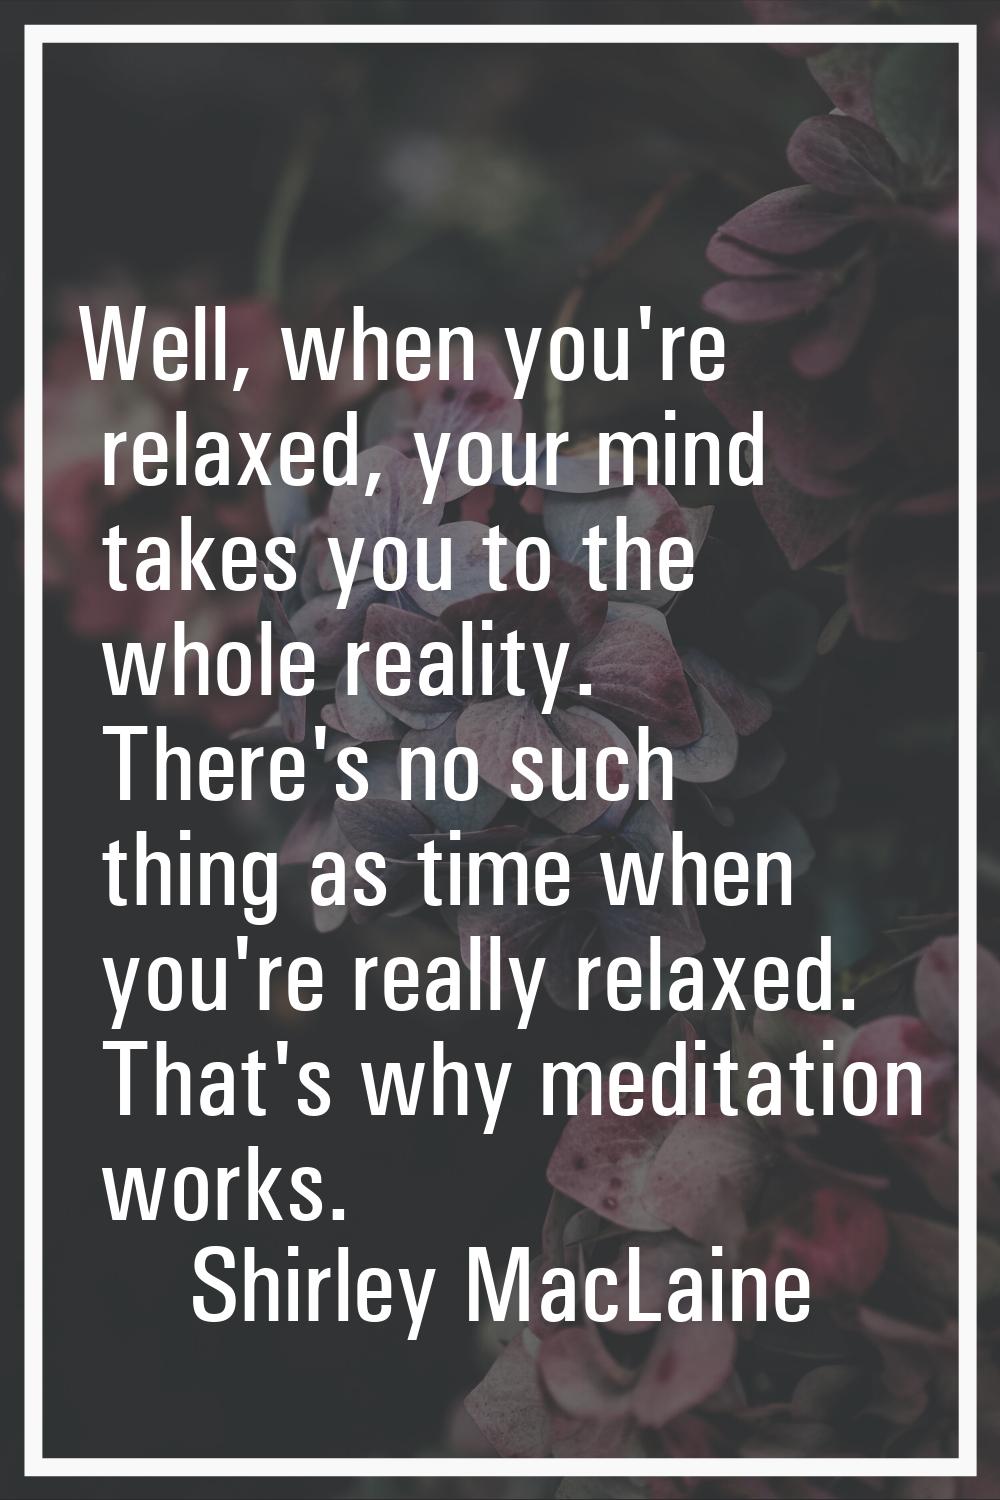 Well, when you're relaxed, your mind takes you to the whole reality. There's no such thing as time 